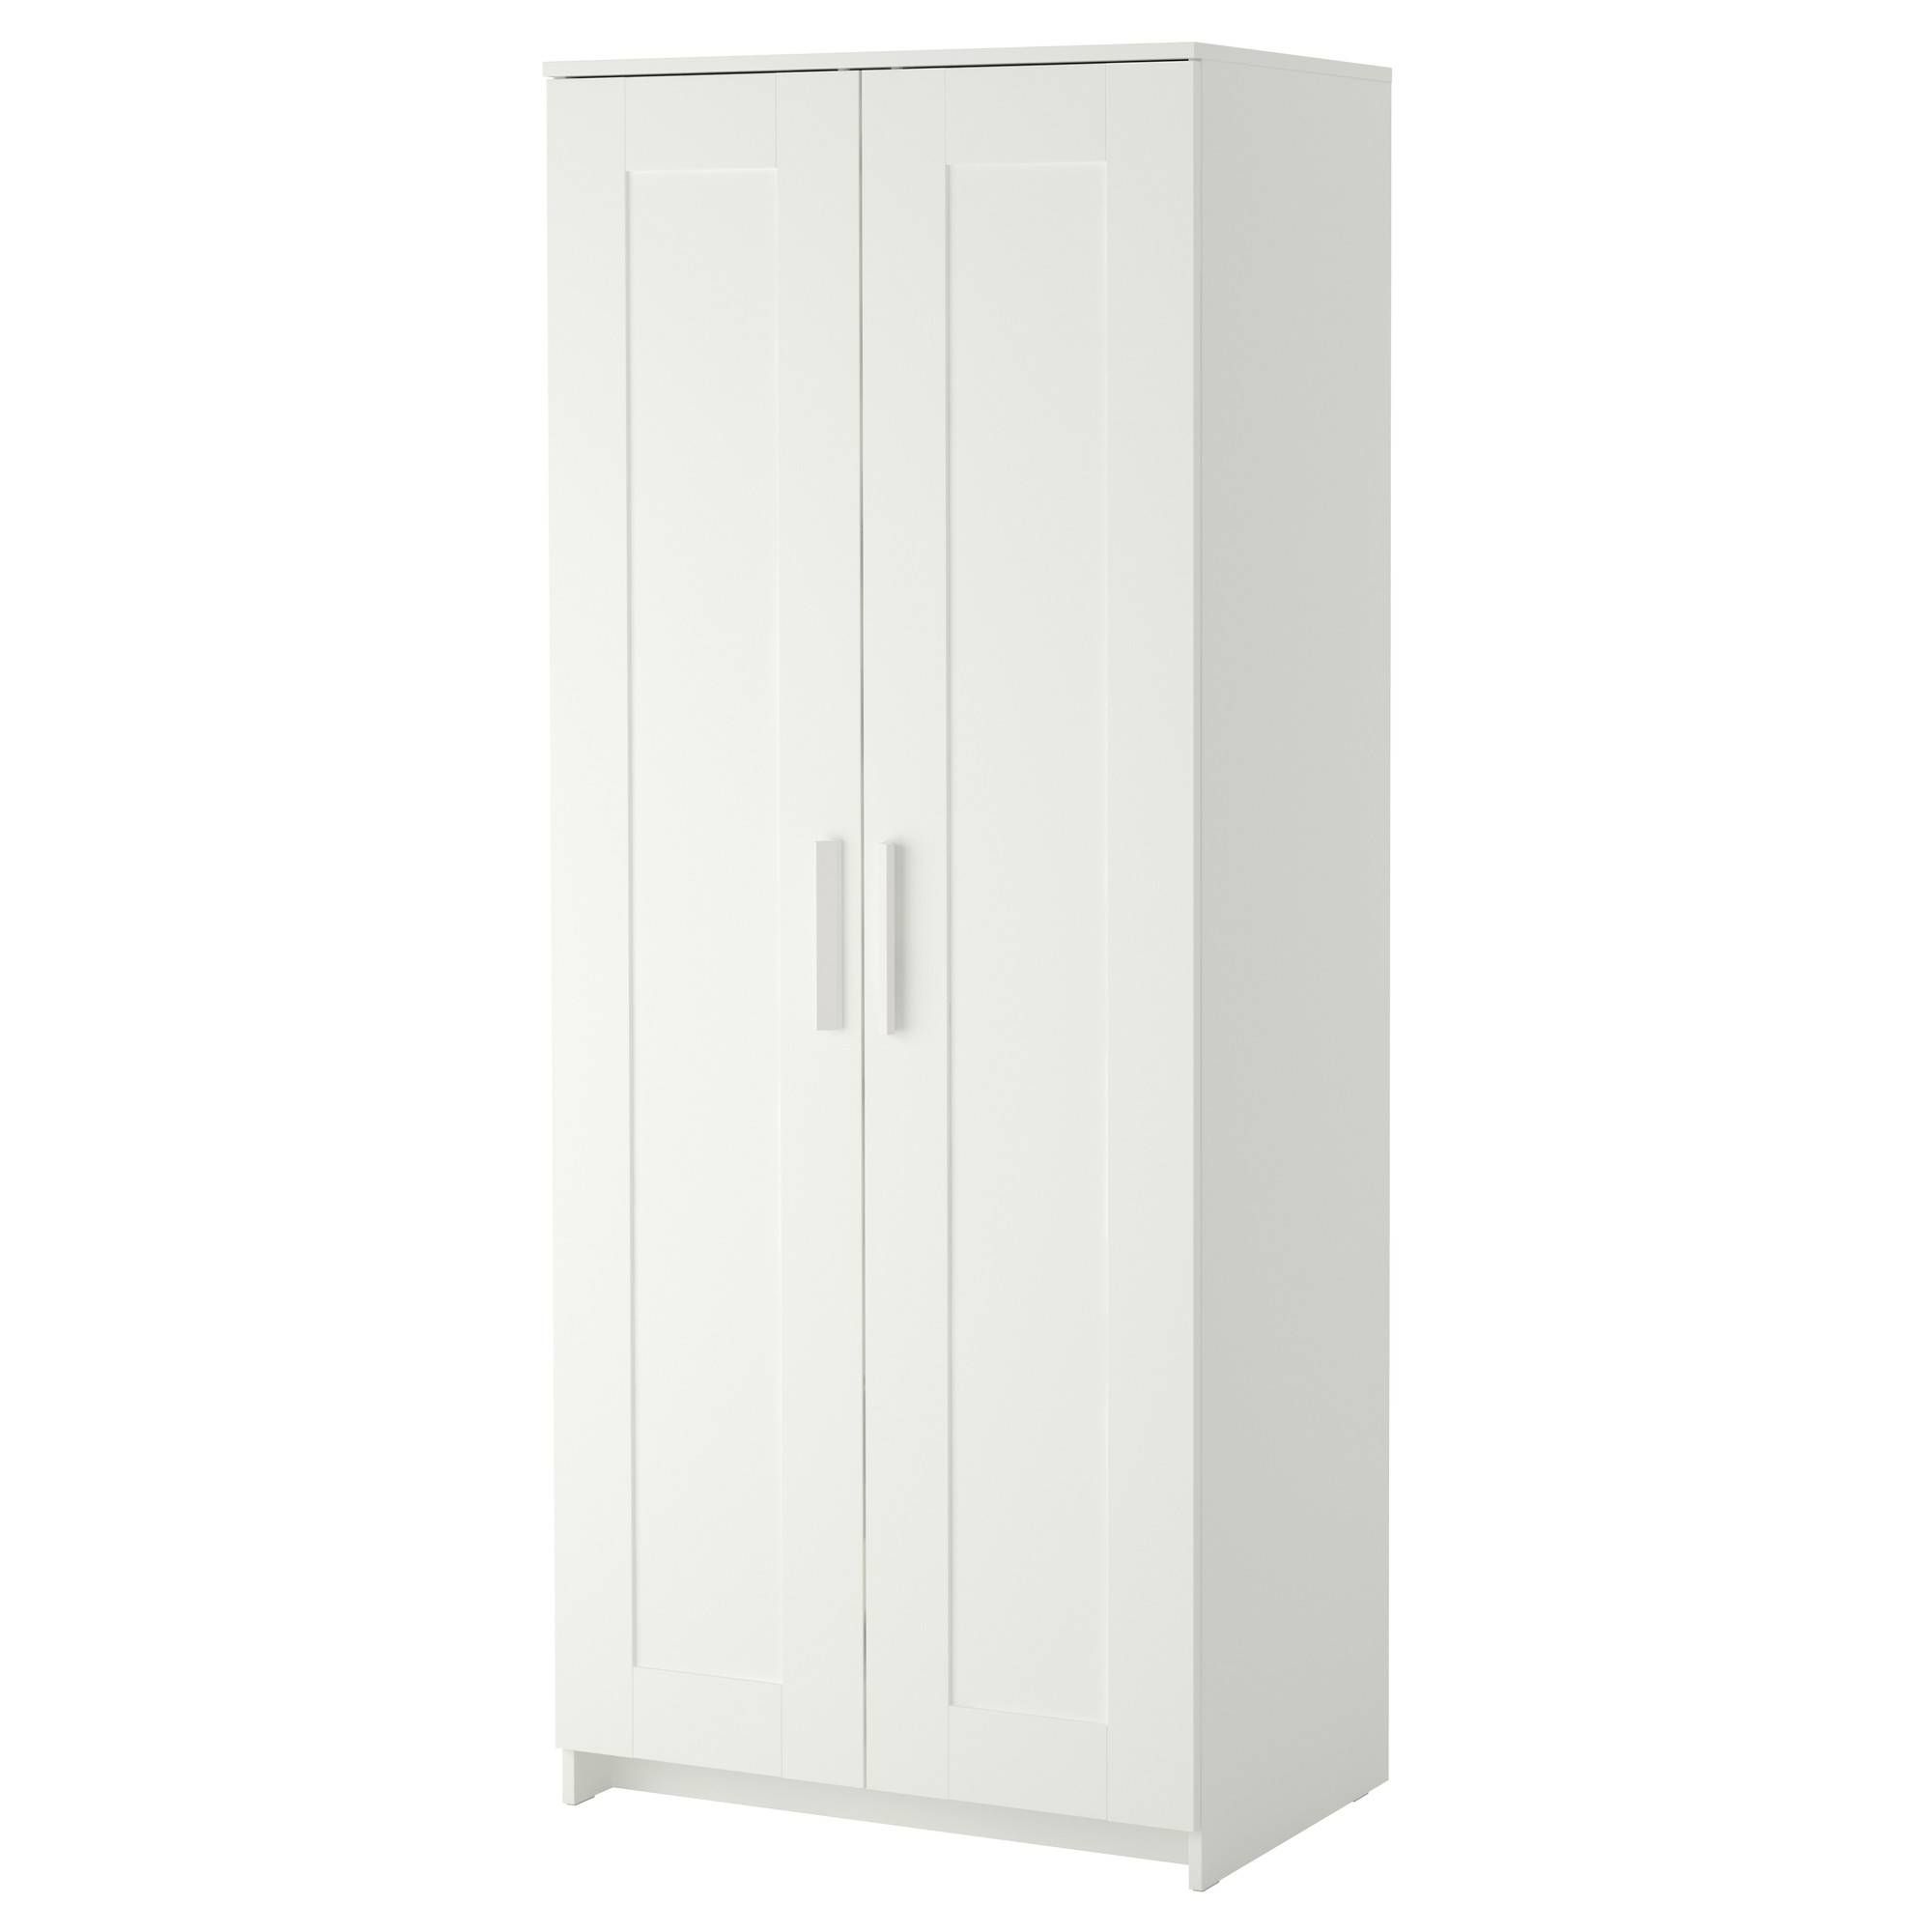 Free Standing Wardrobes | Ikea Throughout Cheap 2 Door Wardrobes (View 2 of 15)